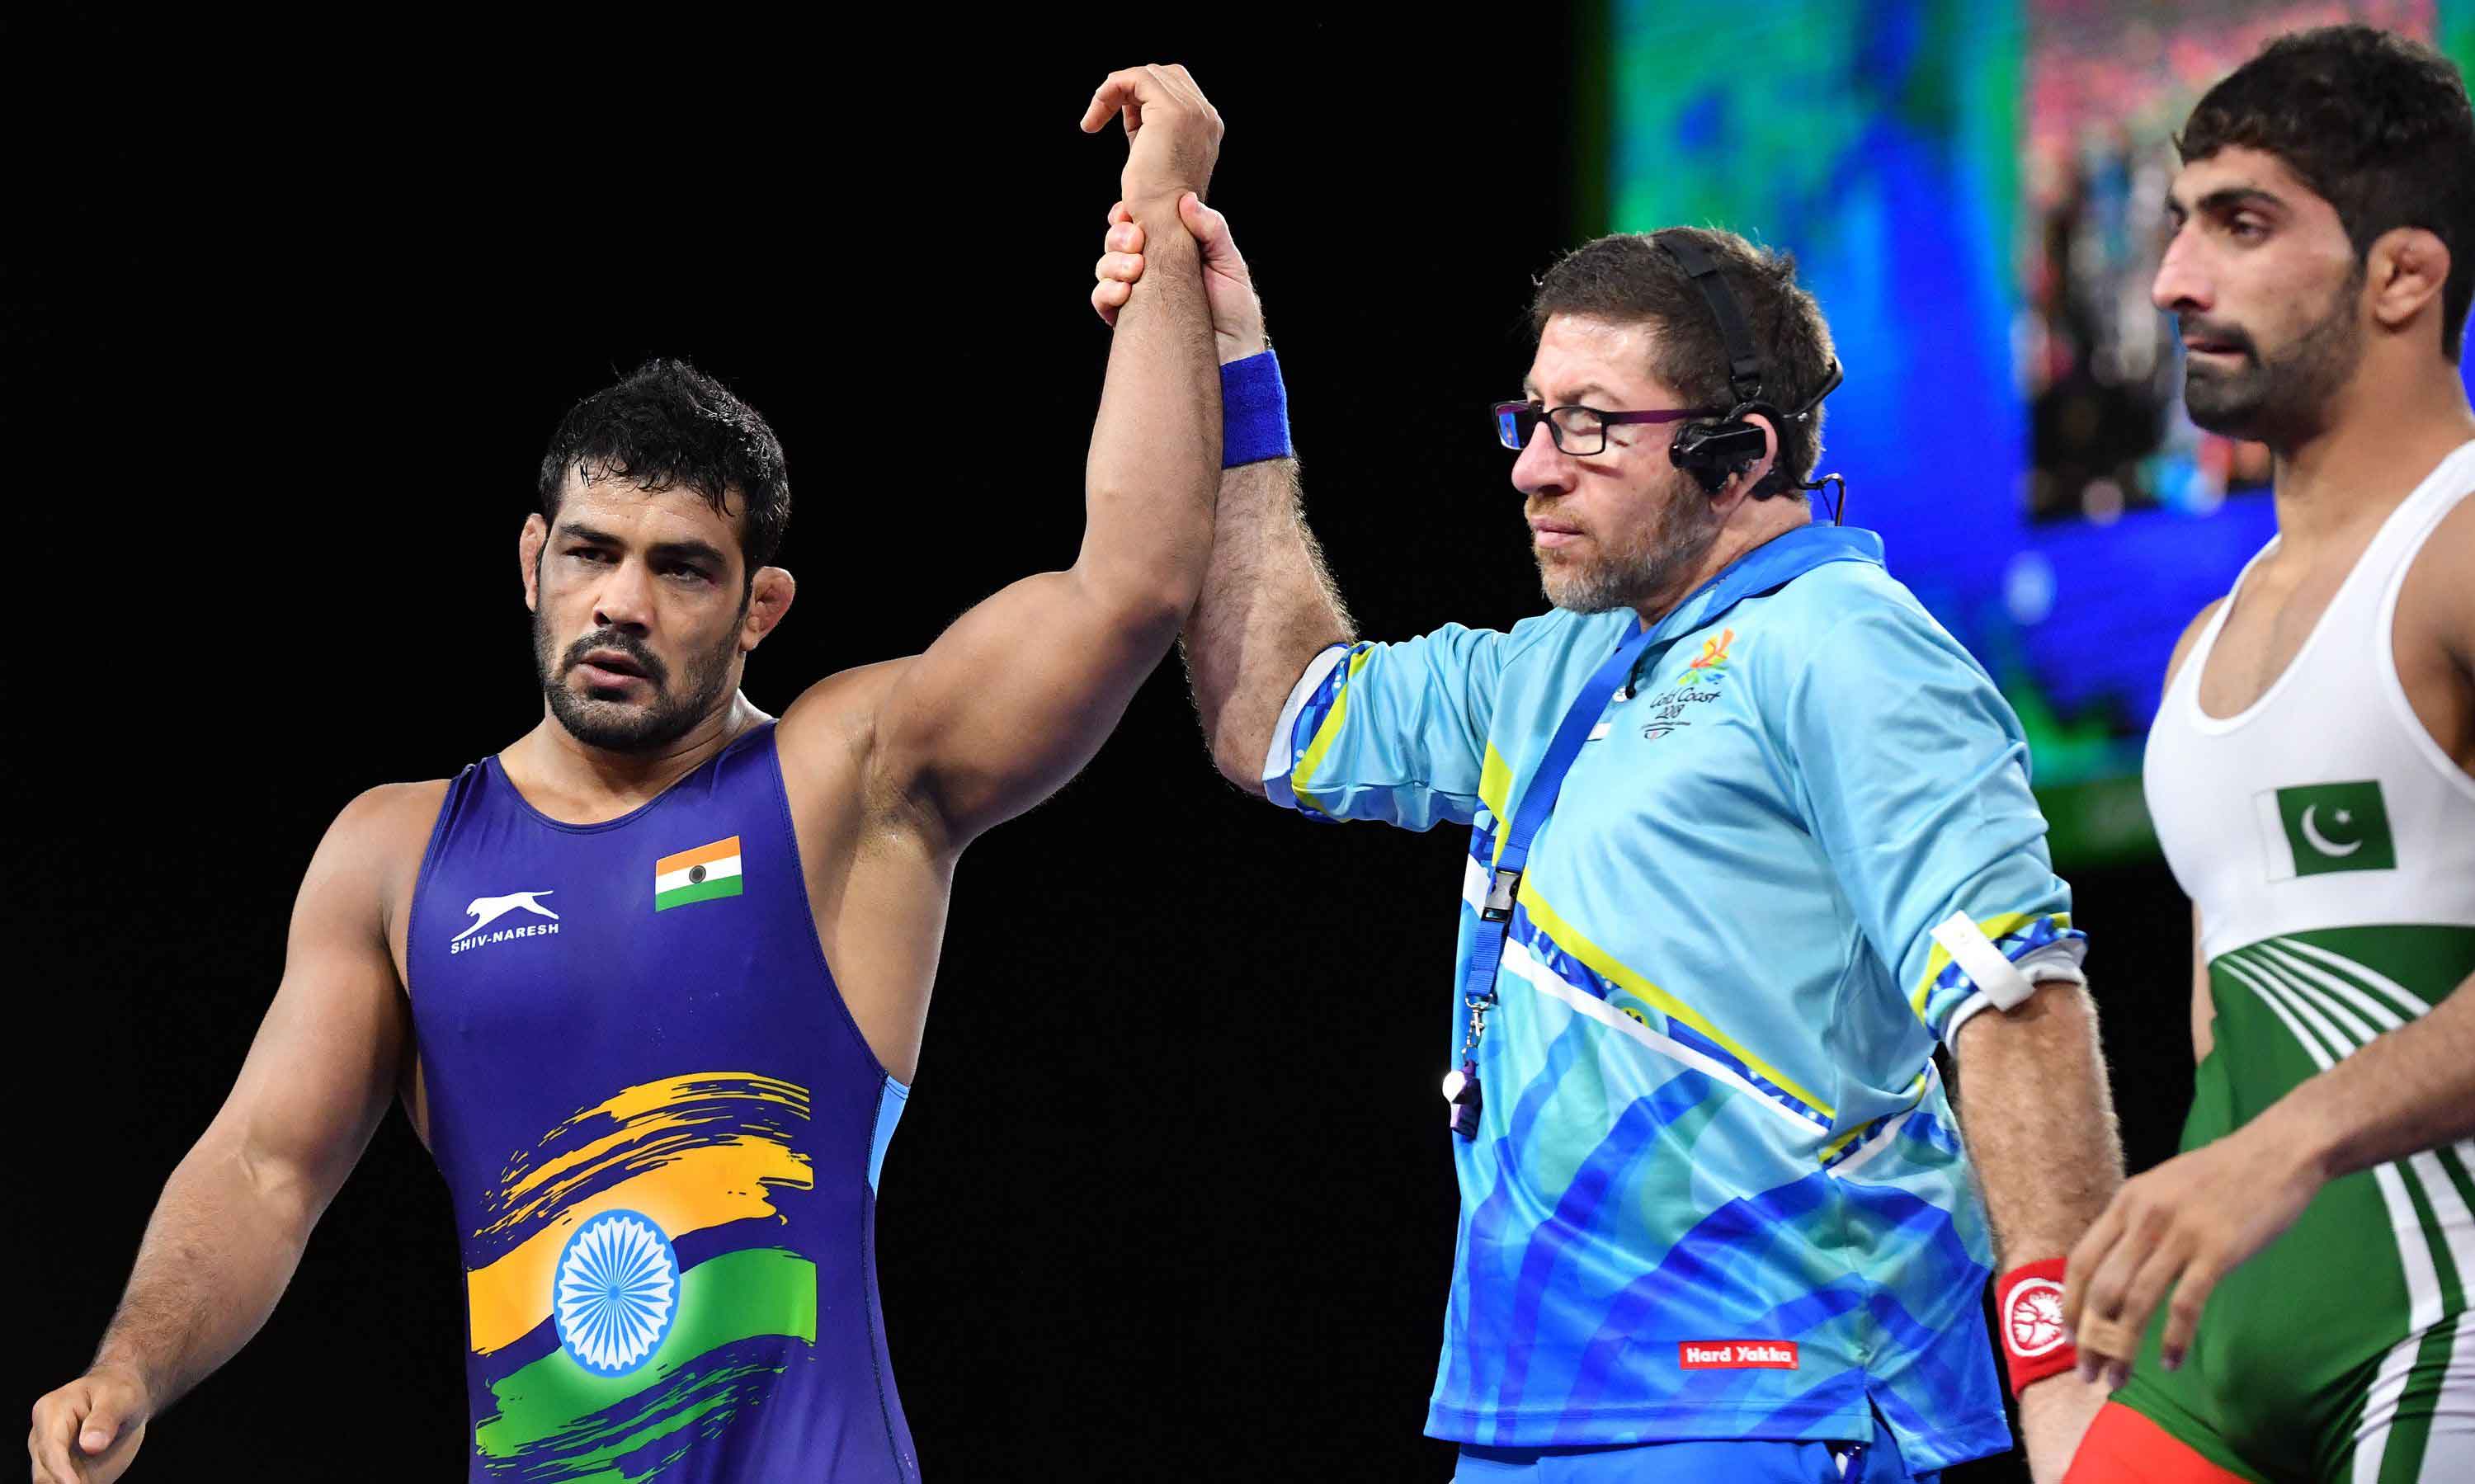 In Pictures: Pakistan's Asad Butt wrestles with India's Kumar Sushil during Commonwealth Games